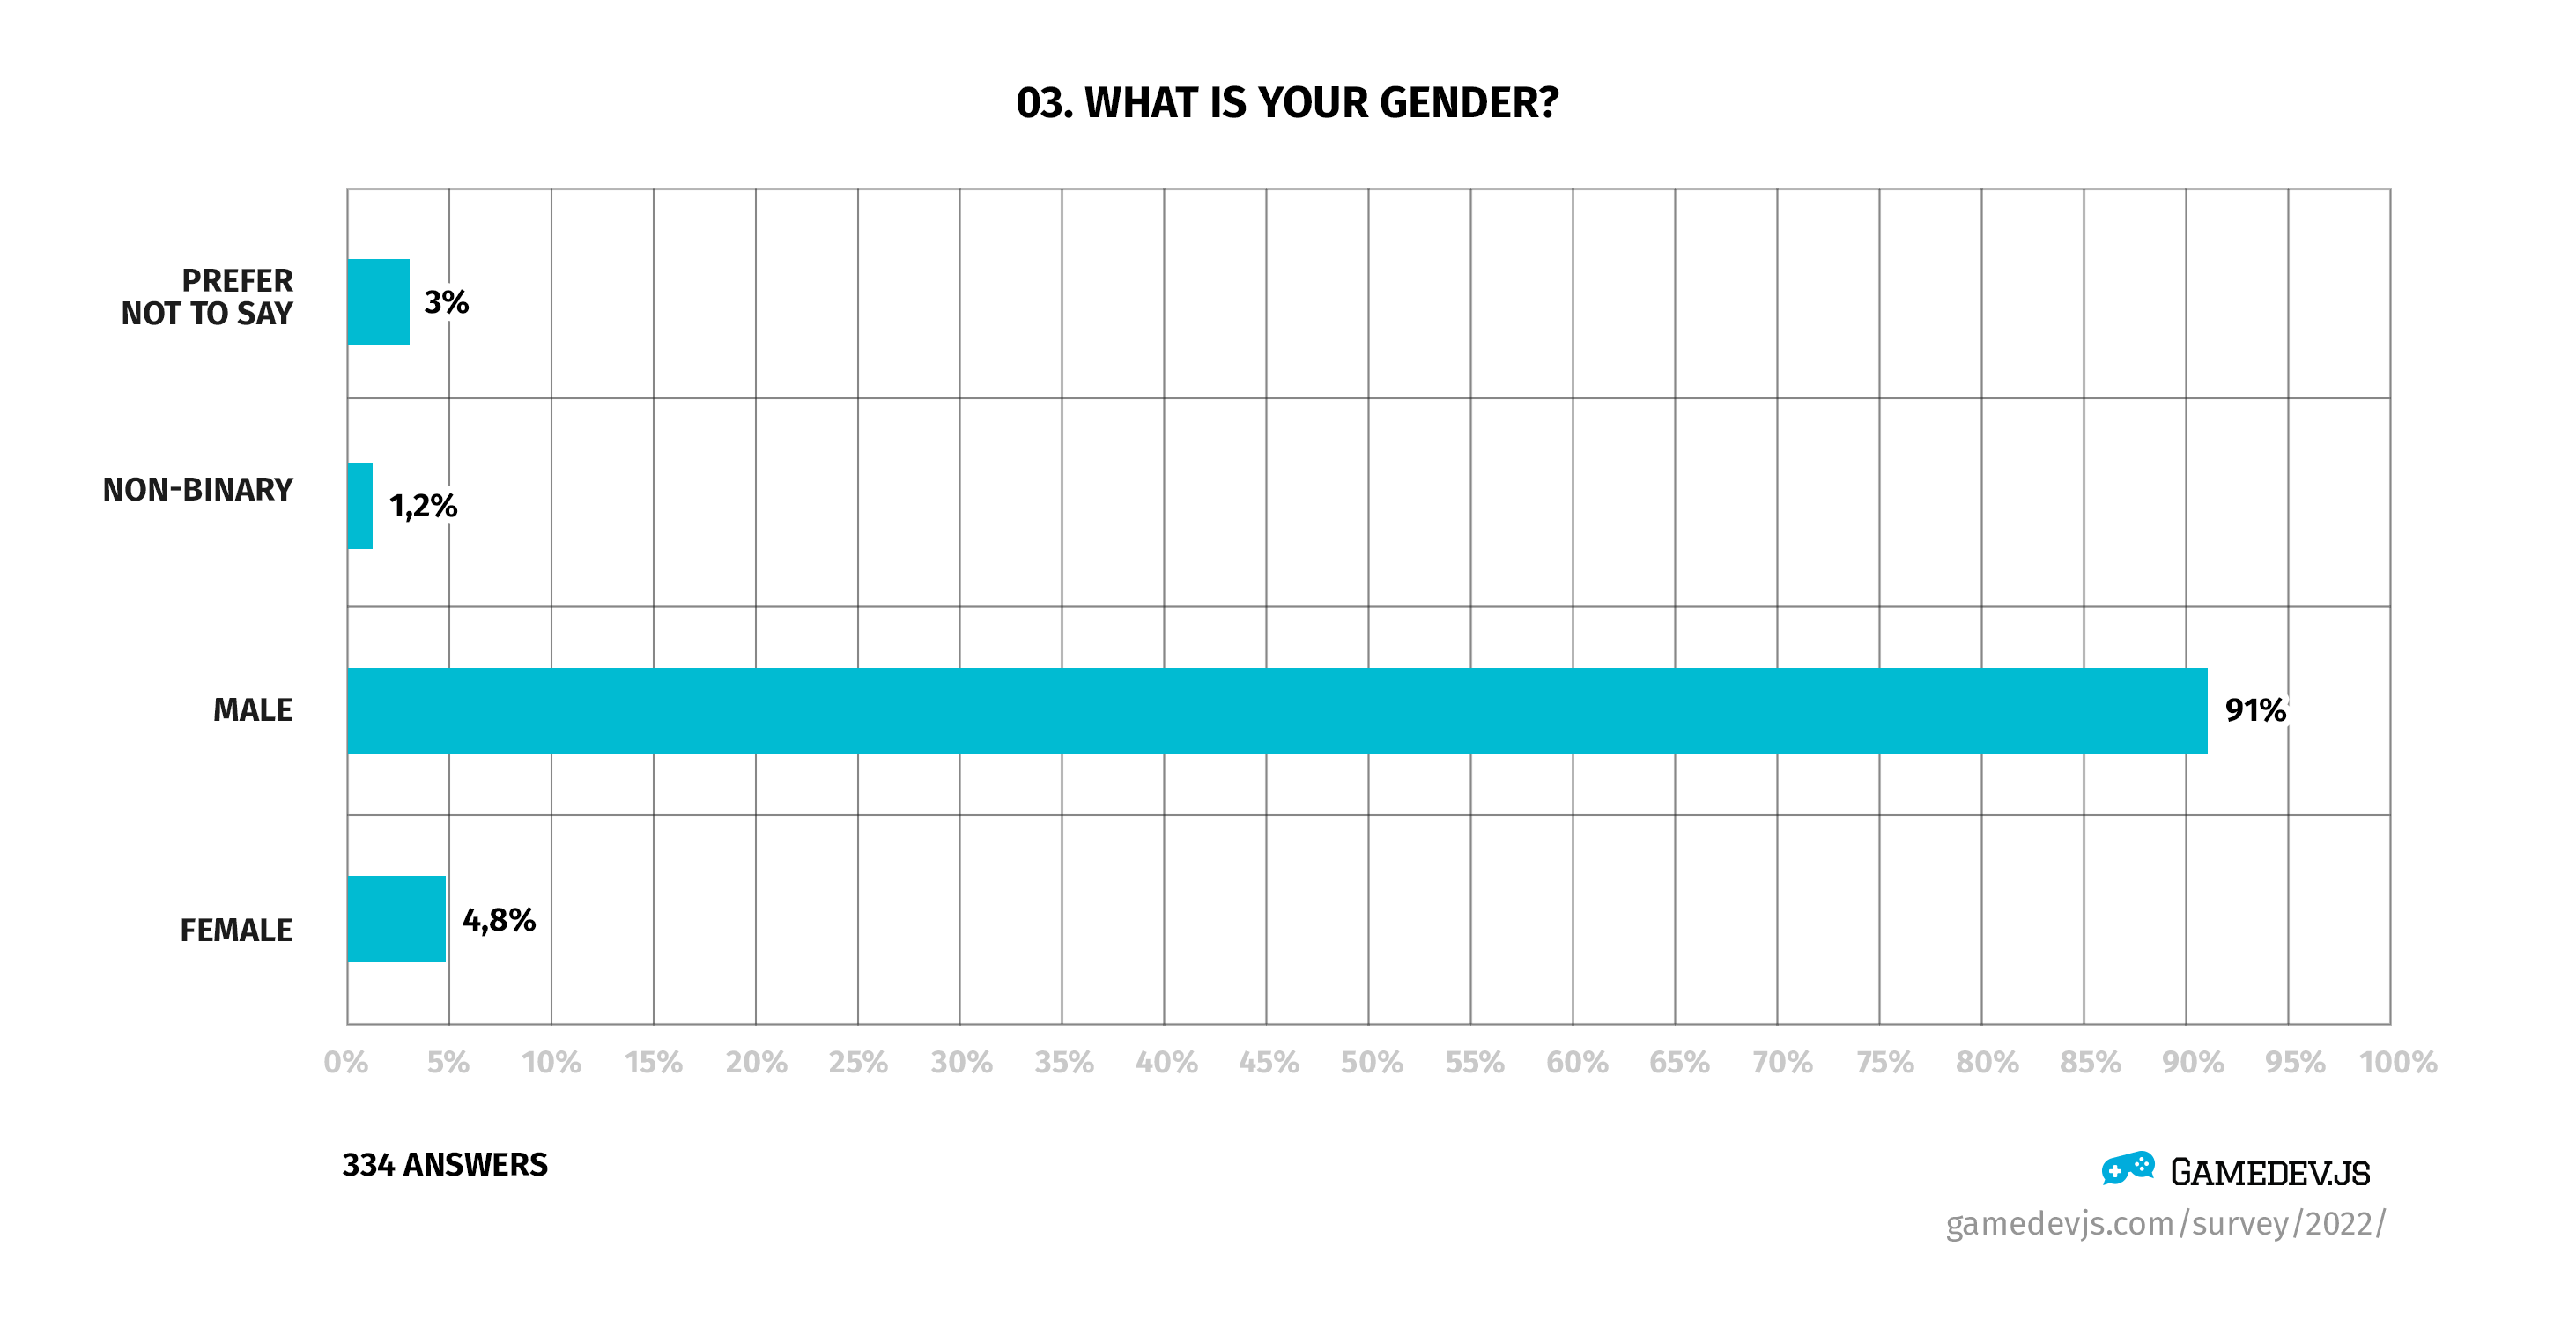 Gamedev.js Survey 2022 - Question #3: What is your gender?